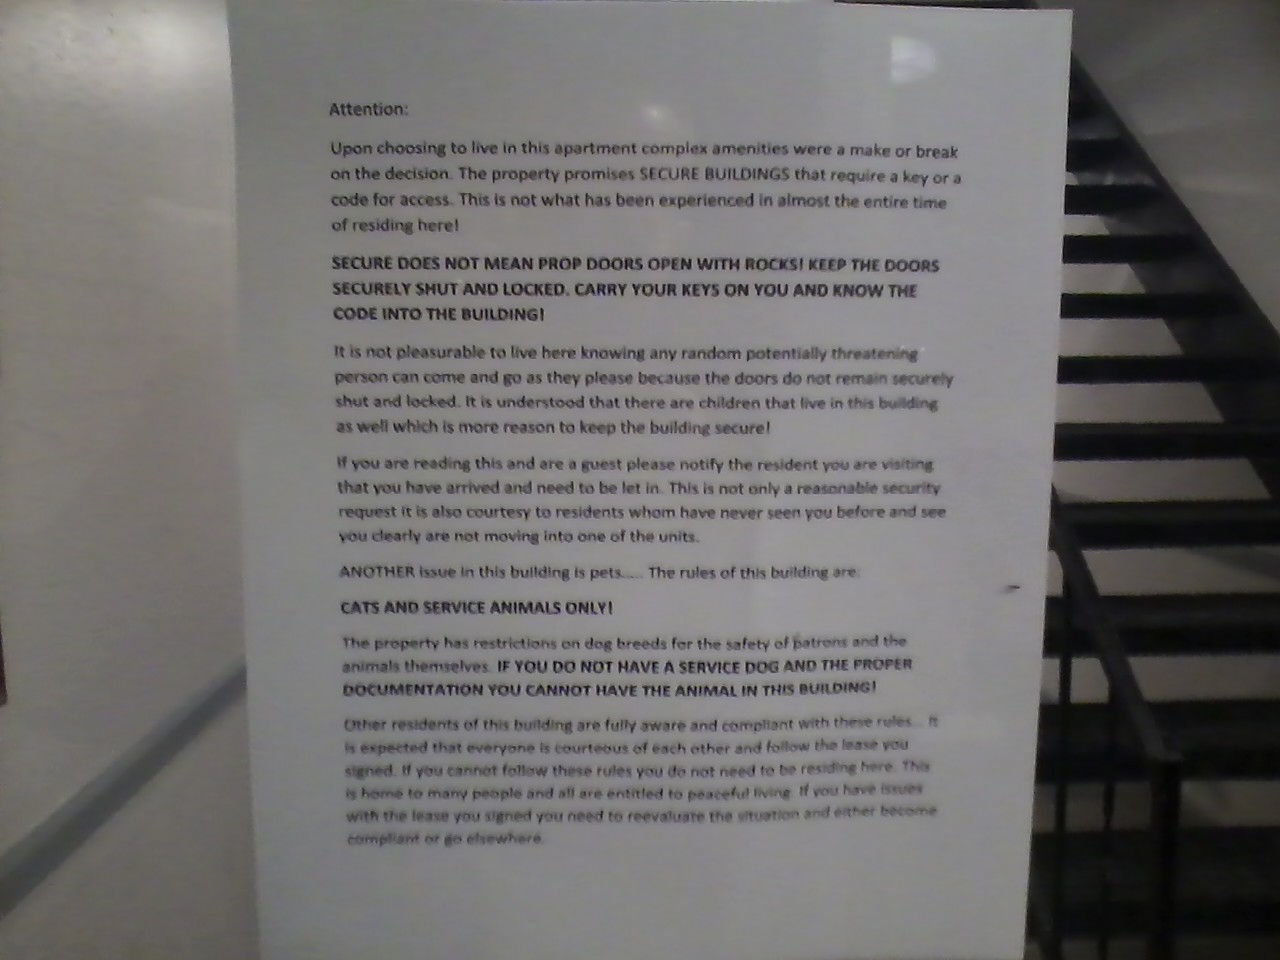 A note on the door of the building complaining about the "security" doors being propped open and people having banned pets.